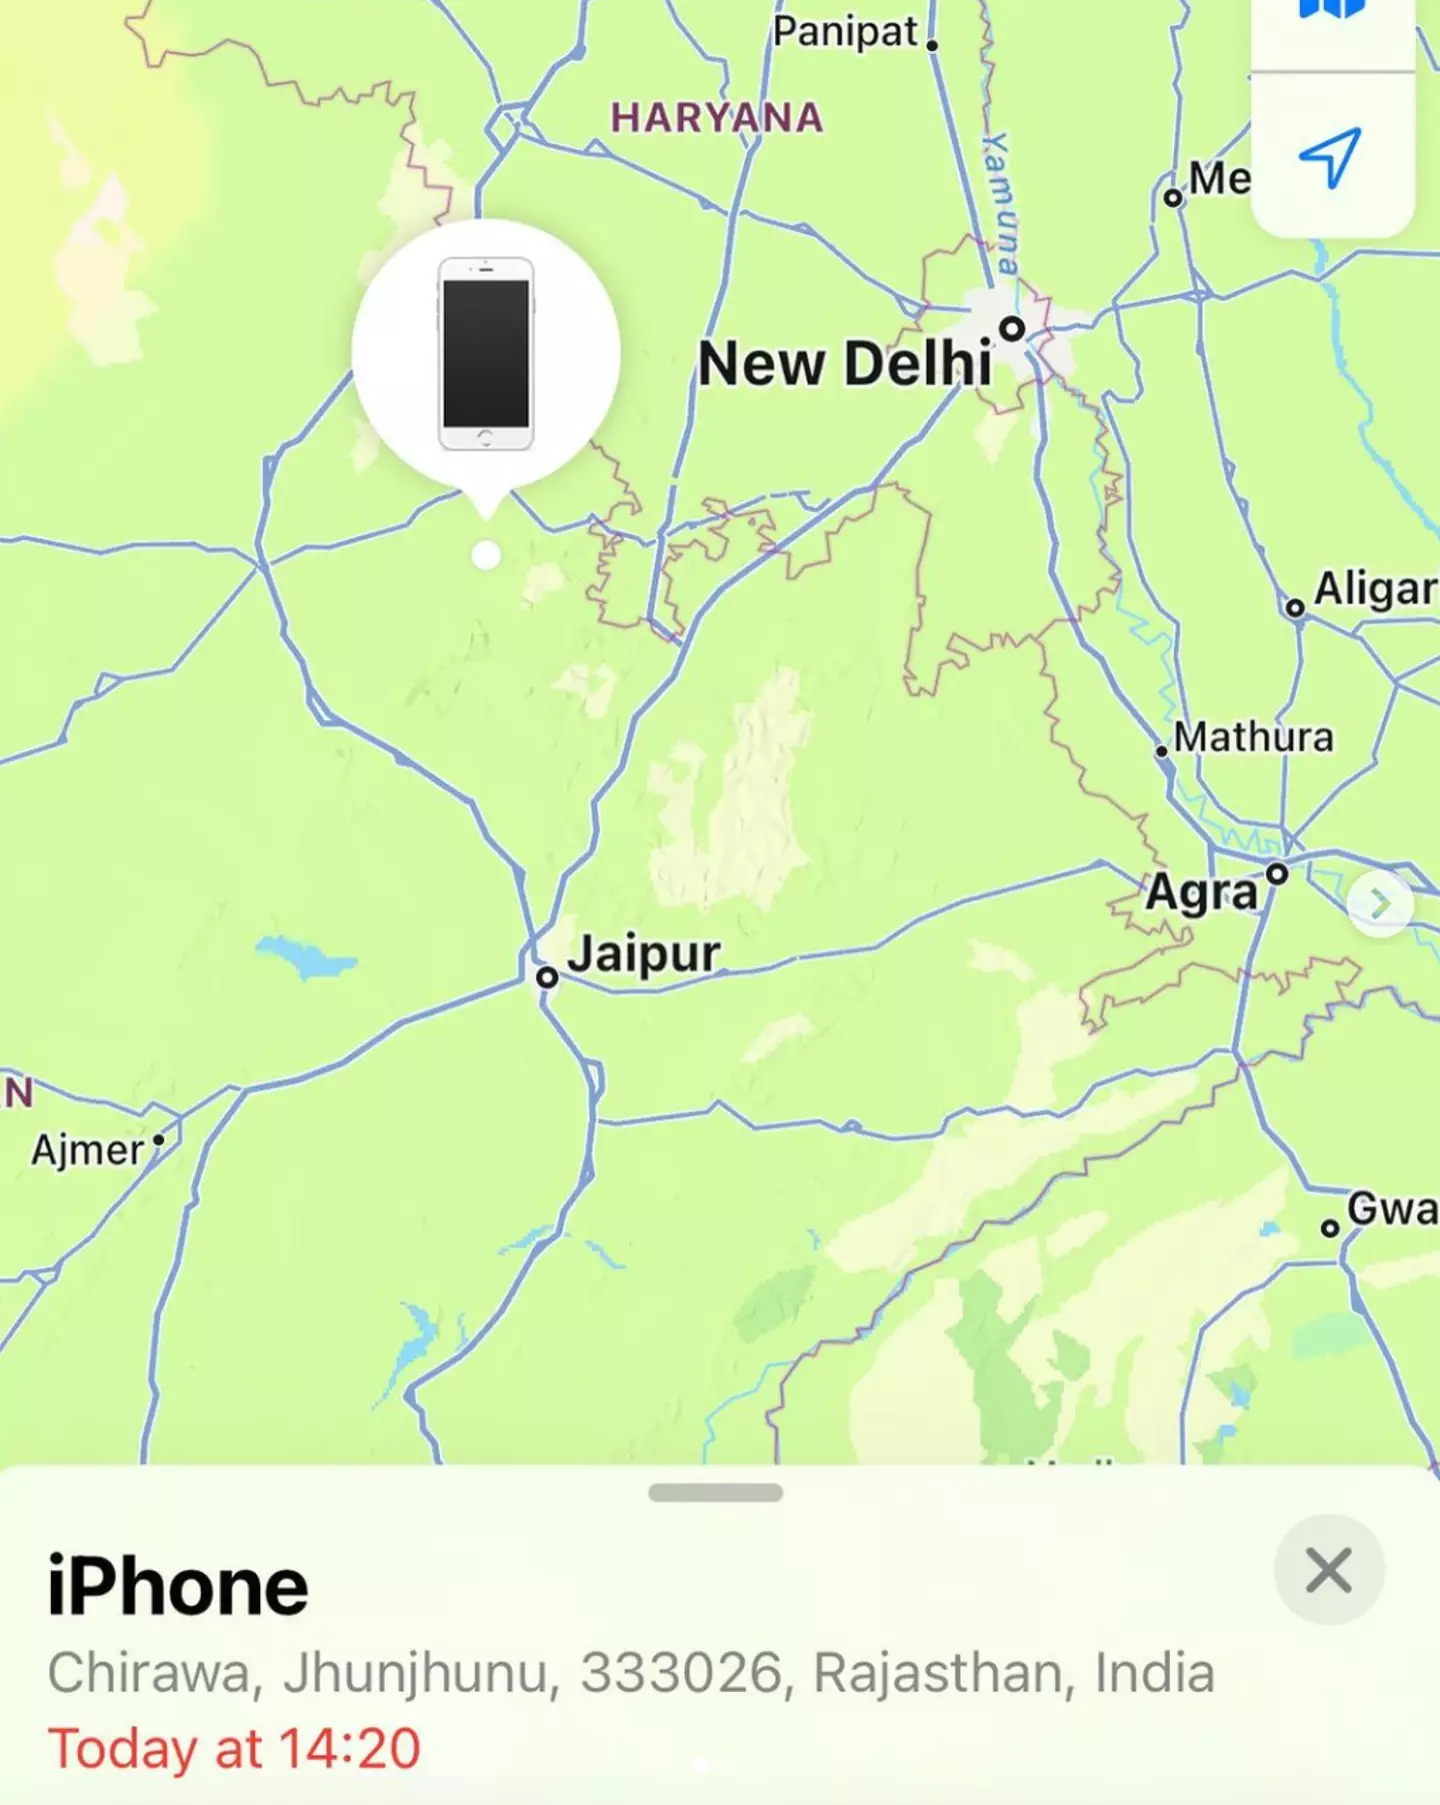 Manford's daughter's phone location appeared to be all the way in India.